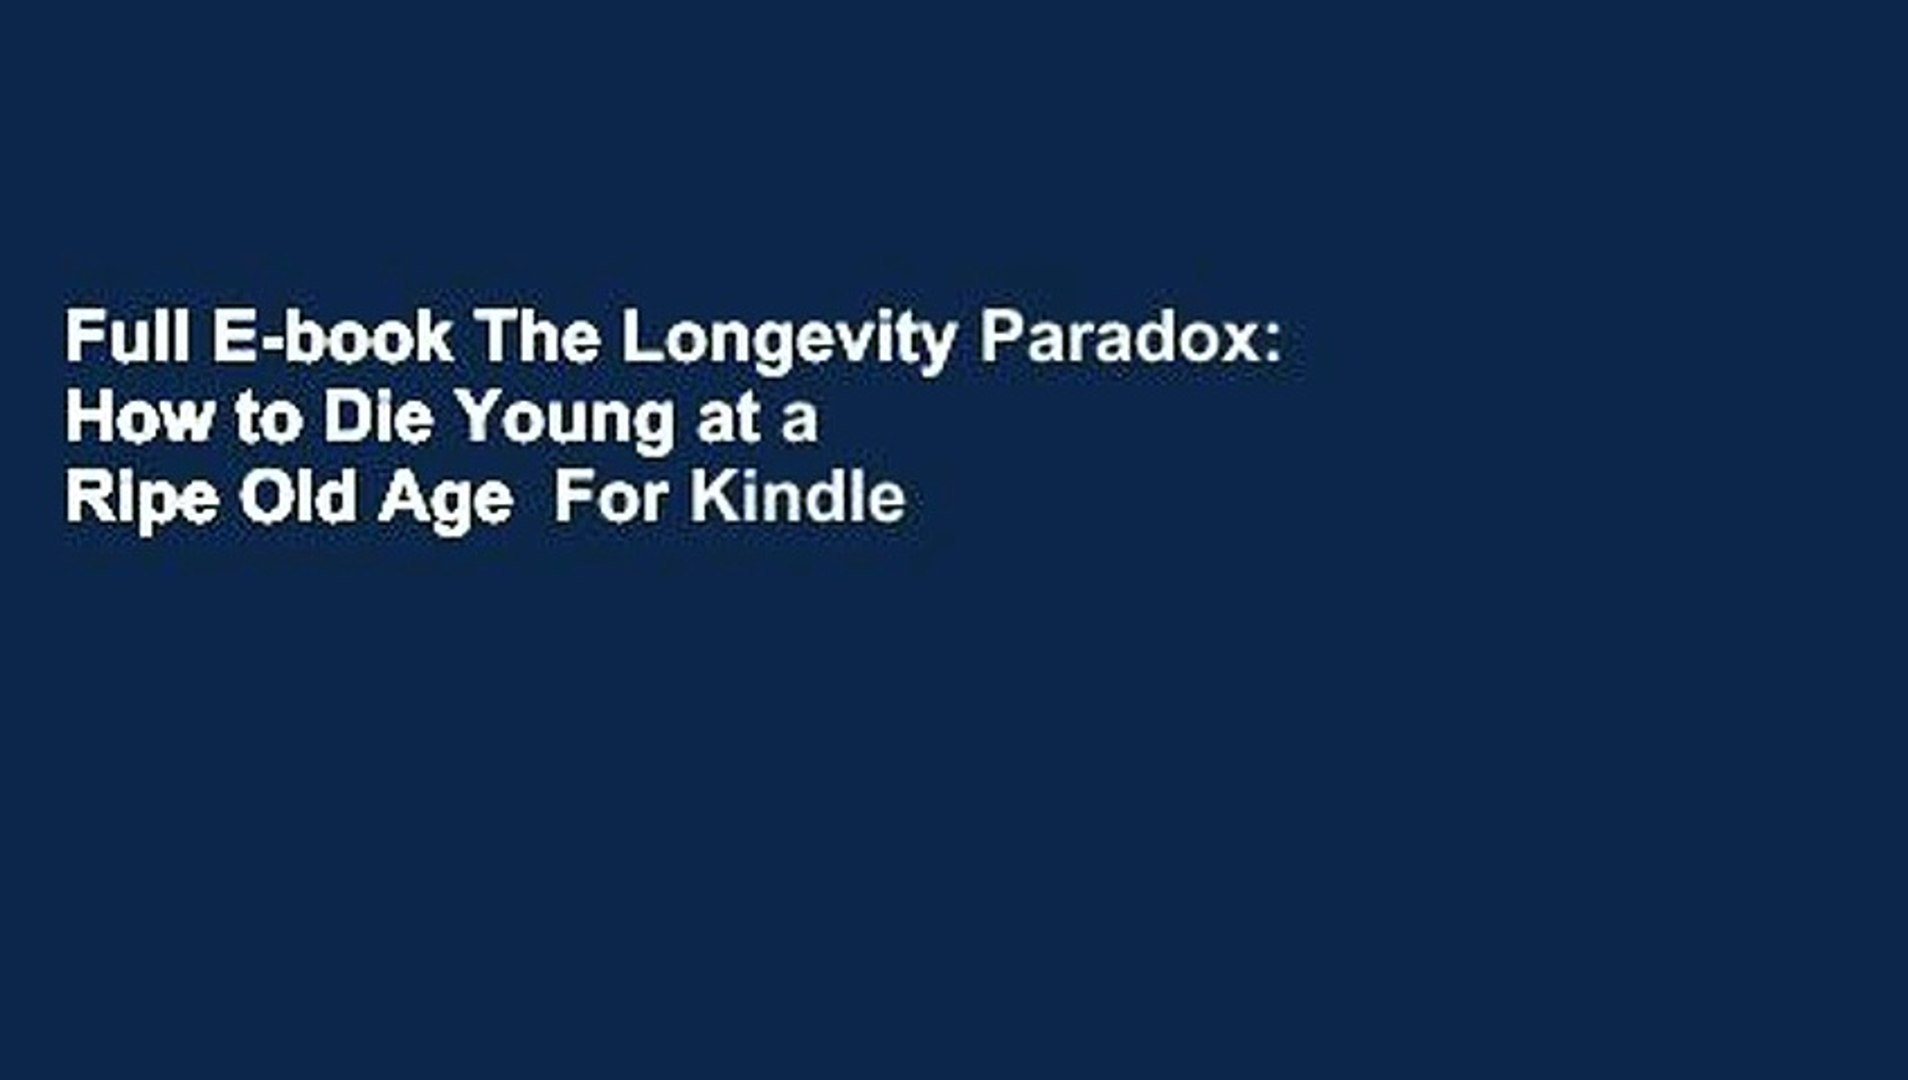 Full E-book The Longevity Paradox: How to Die Young at a Ripe Old Age  For Kindle